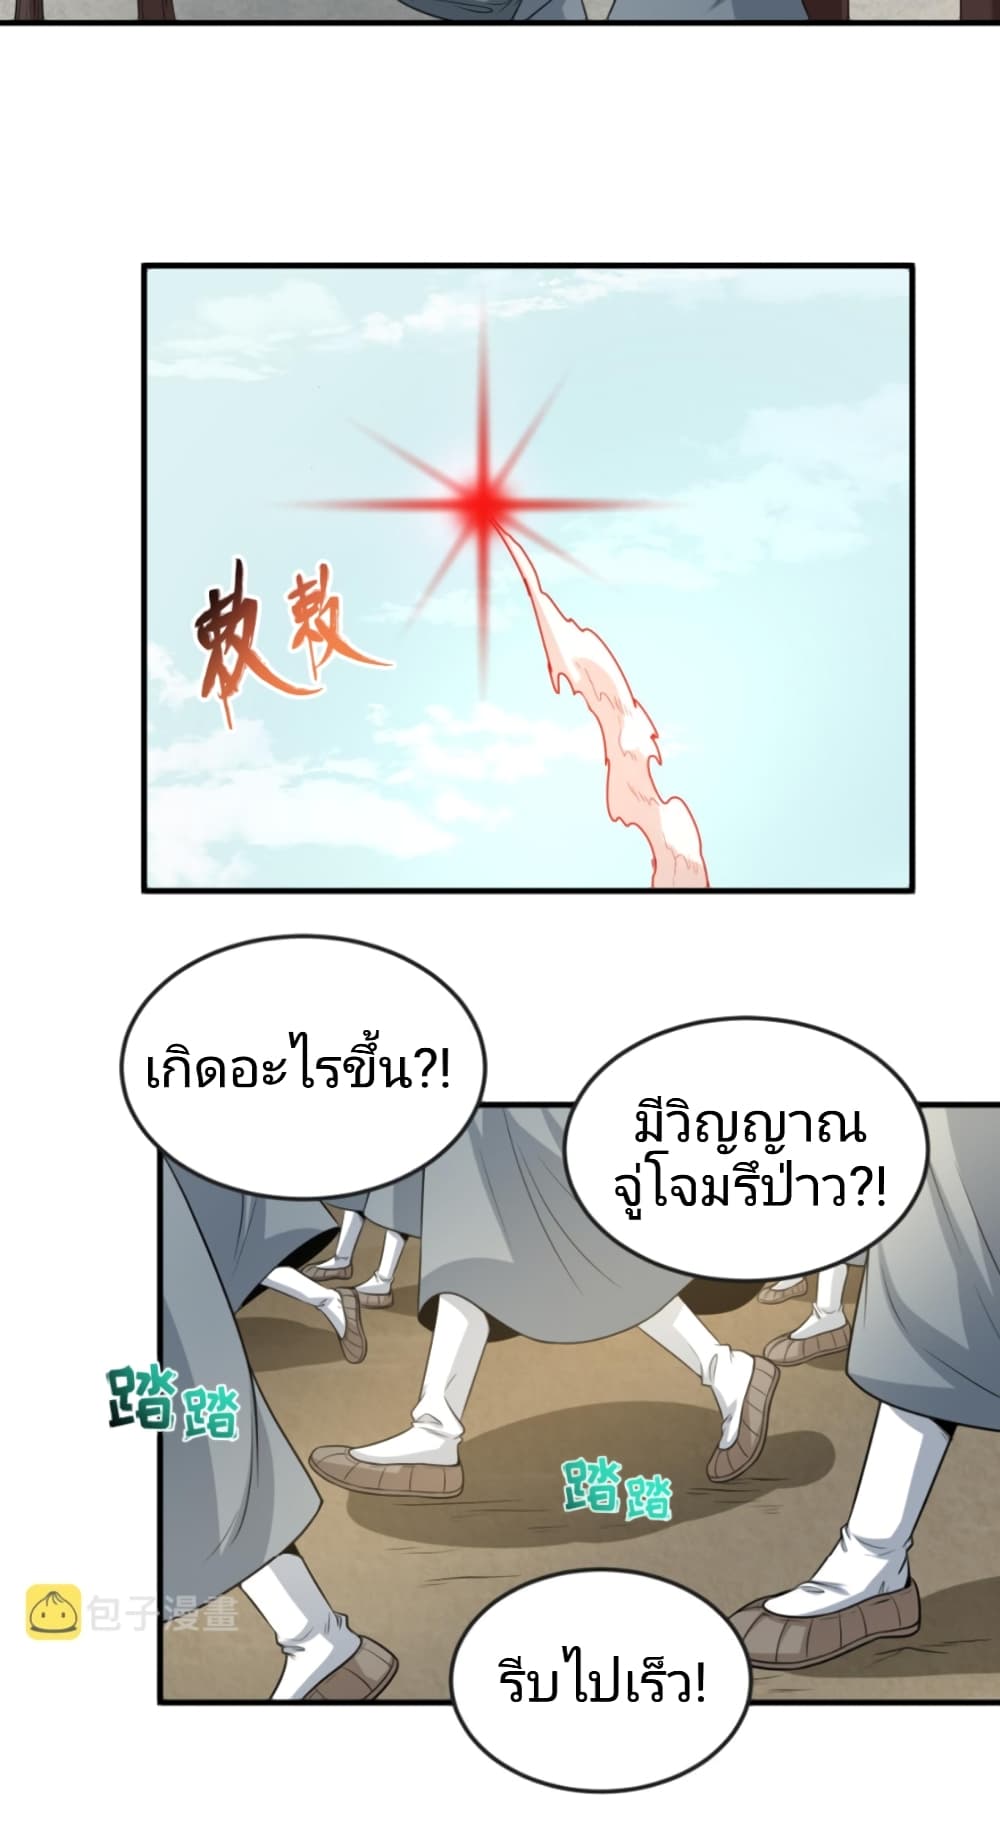 The Age of Ghost Spirits à¸à¸­à¸à¸à¸µà¹ 43 (31)